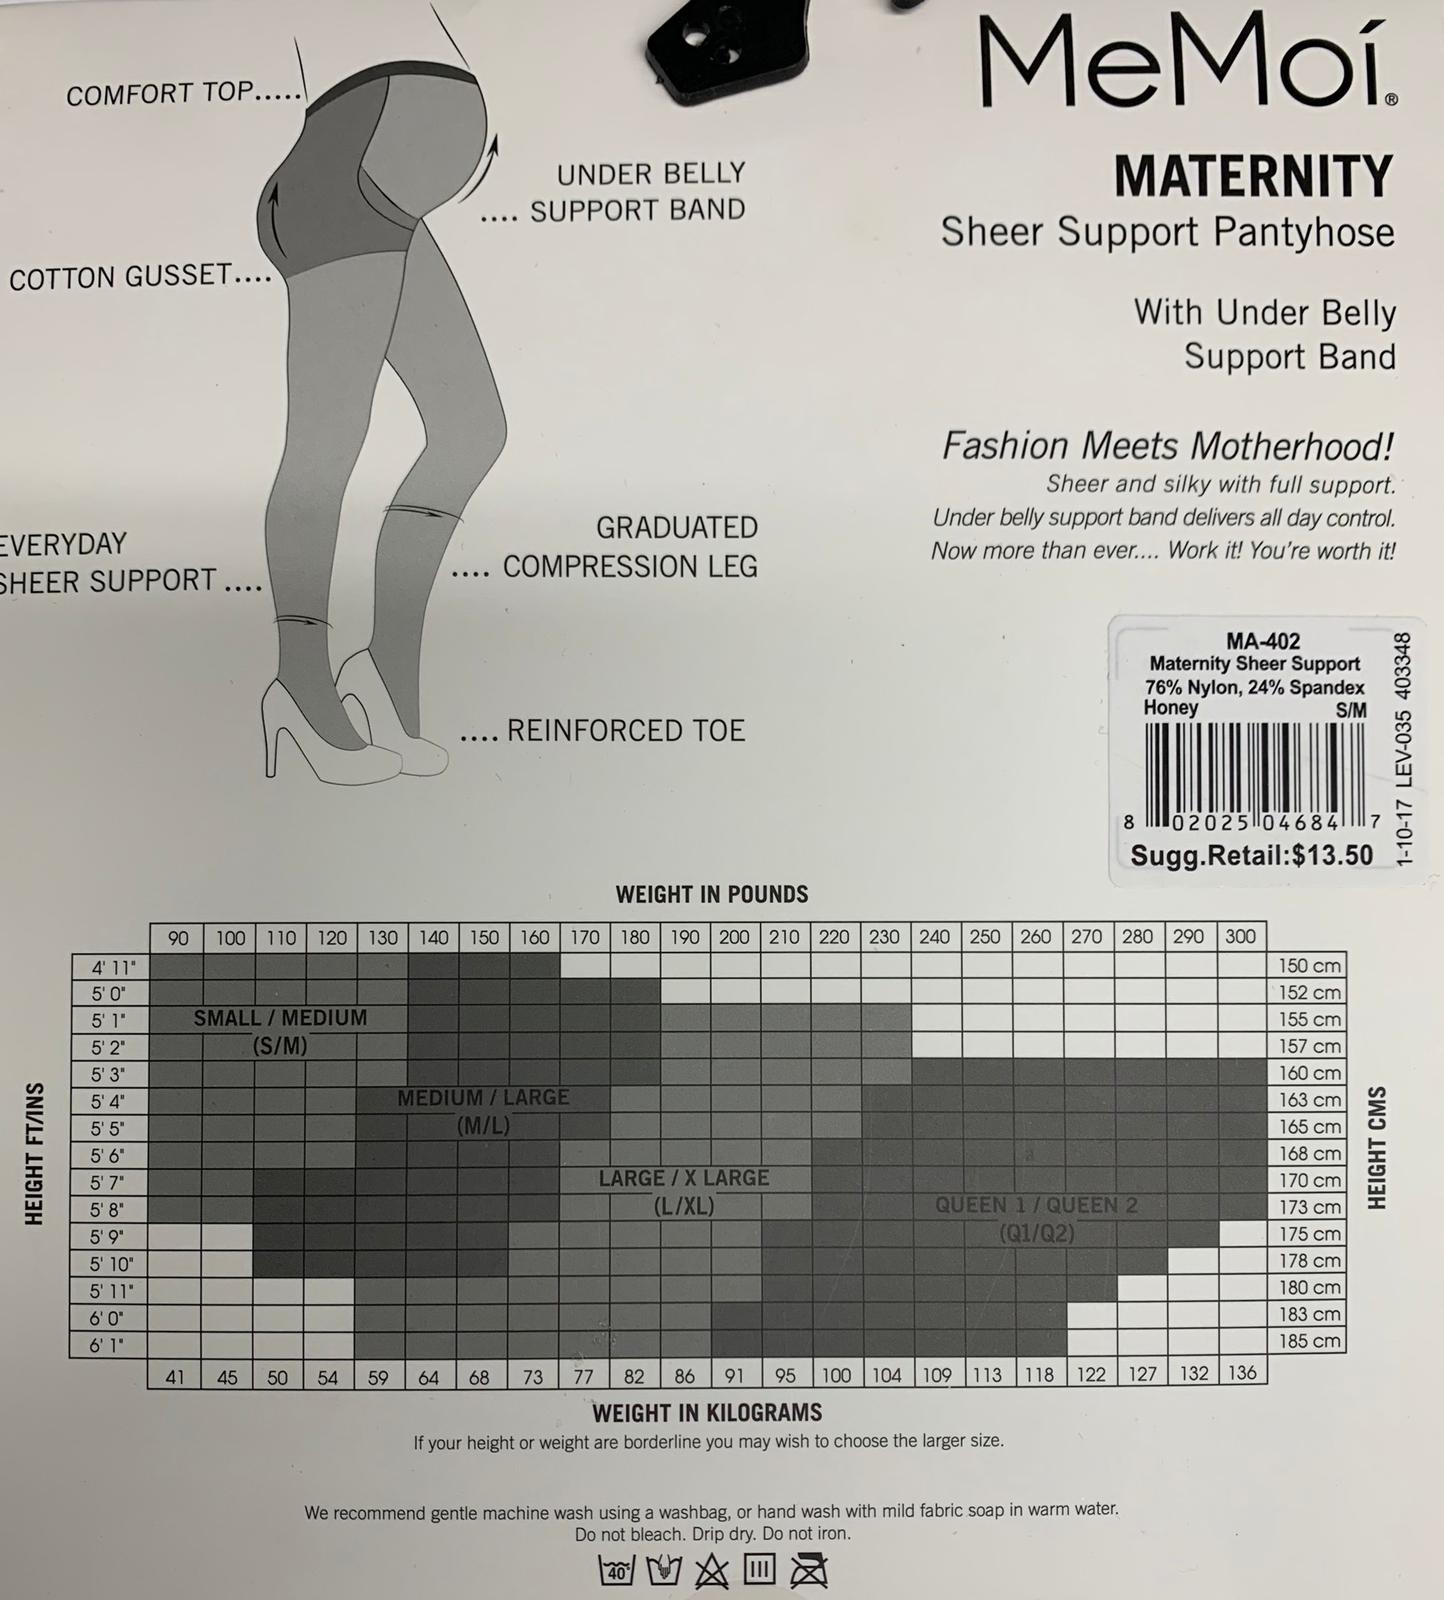 MeMoi 40 Maternity Sheer Support Pantyhose – Legaacy